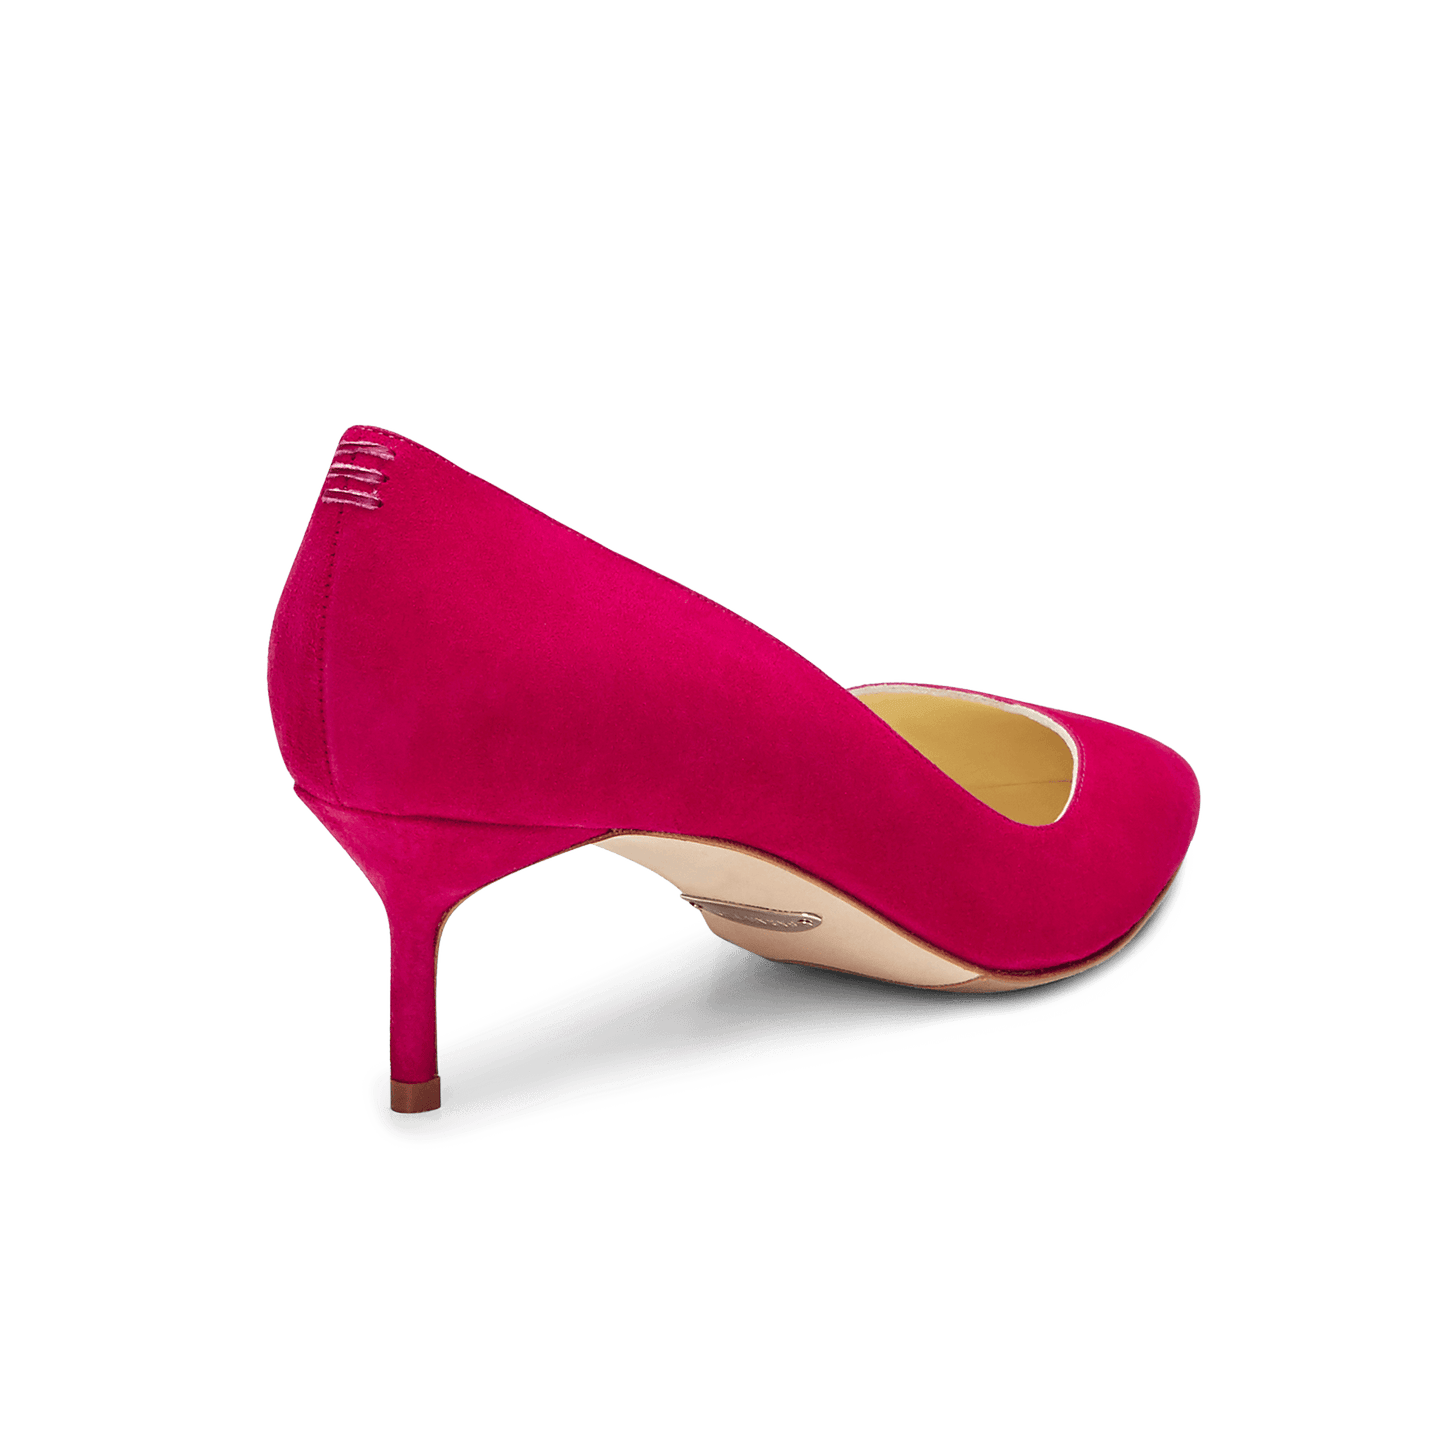 50mm Italian Made Pointed Toe Pump in Pomegranate Suede